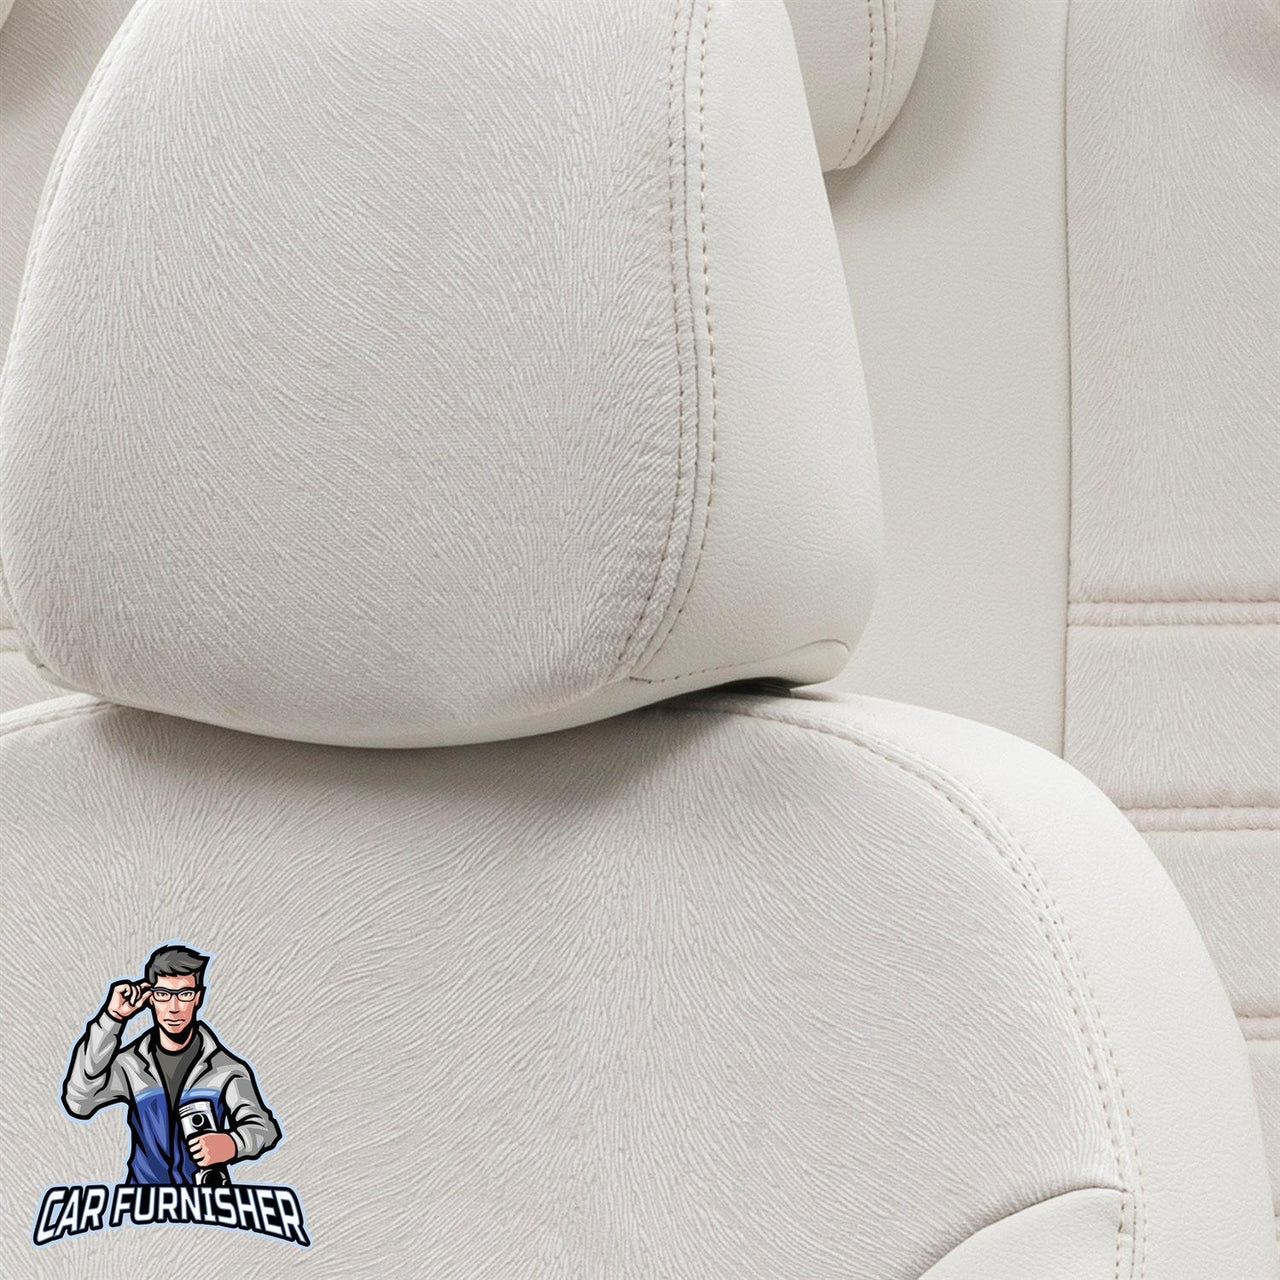 Subaru Legacy Seat Cover London Foal Feather Design Ivory Leather & Foal Feather